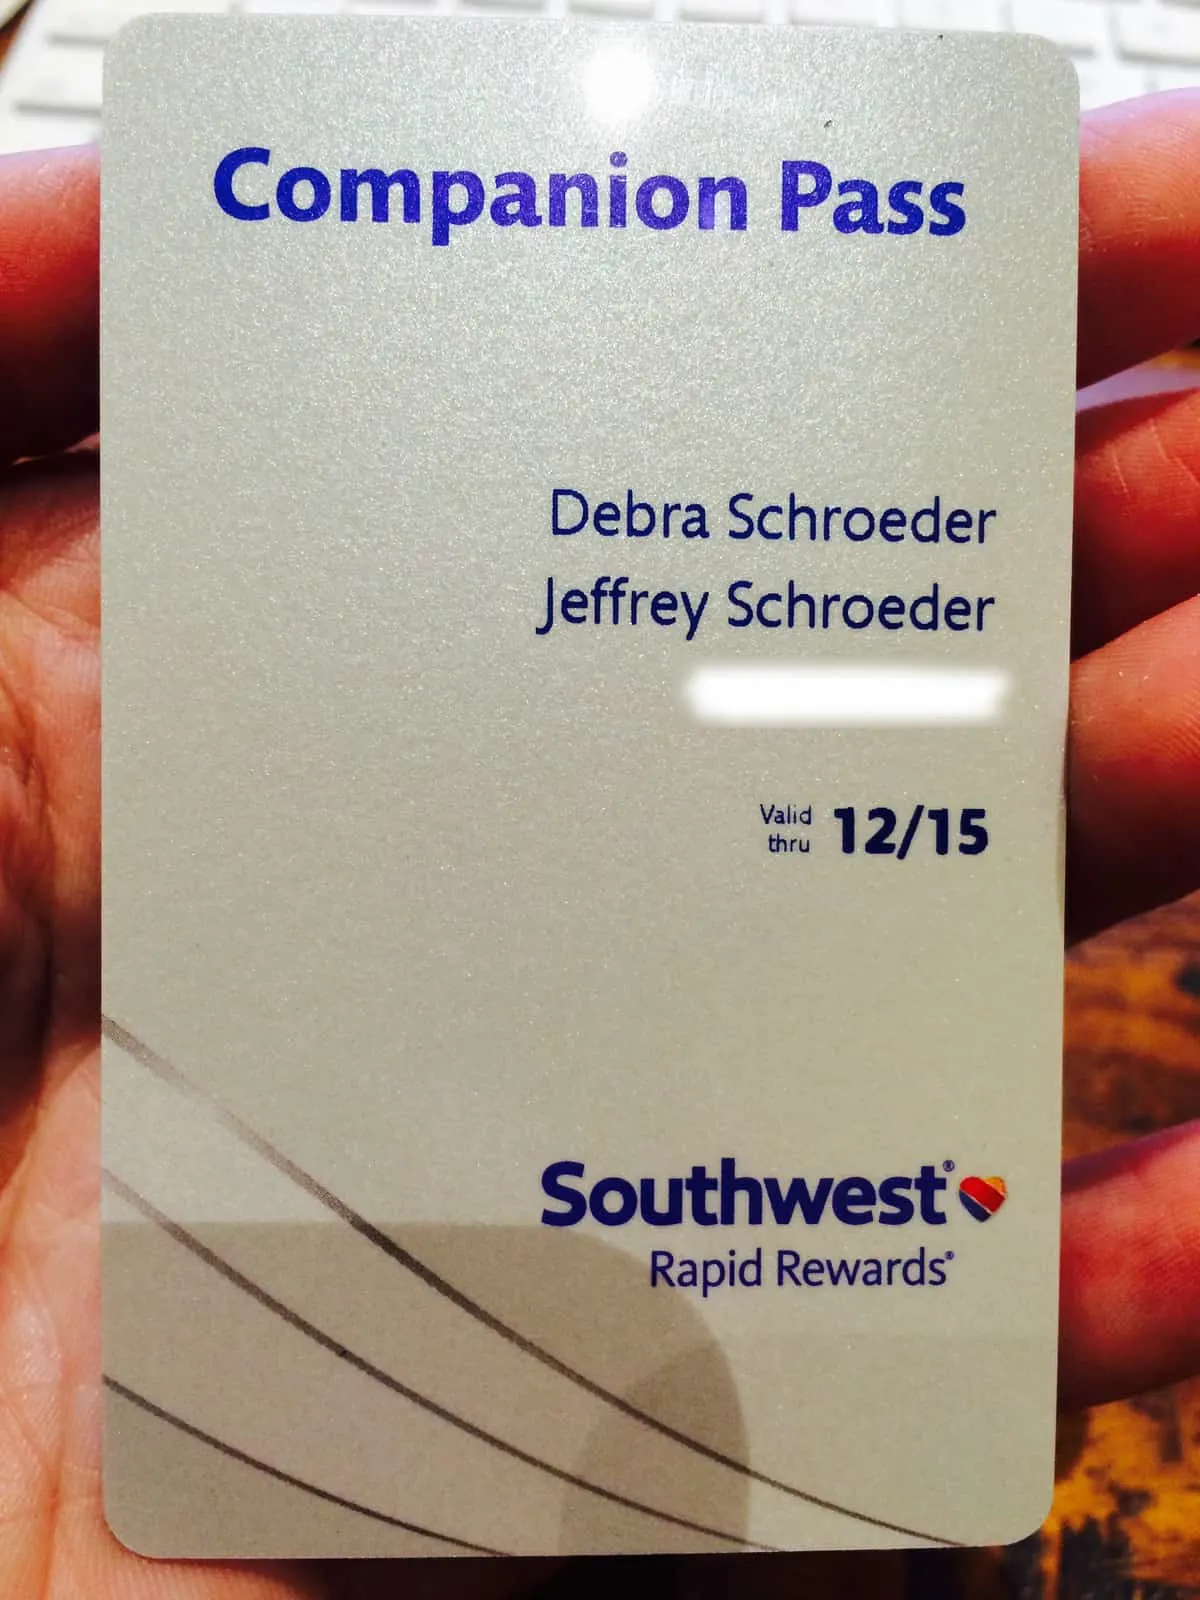 With the Southwest Companion Pass, your companion can fly free for up to 2 years, Traveling Well For Less